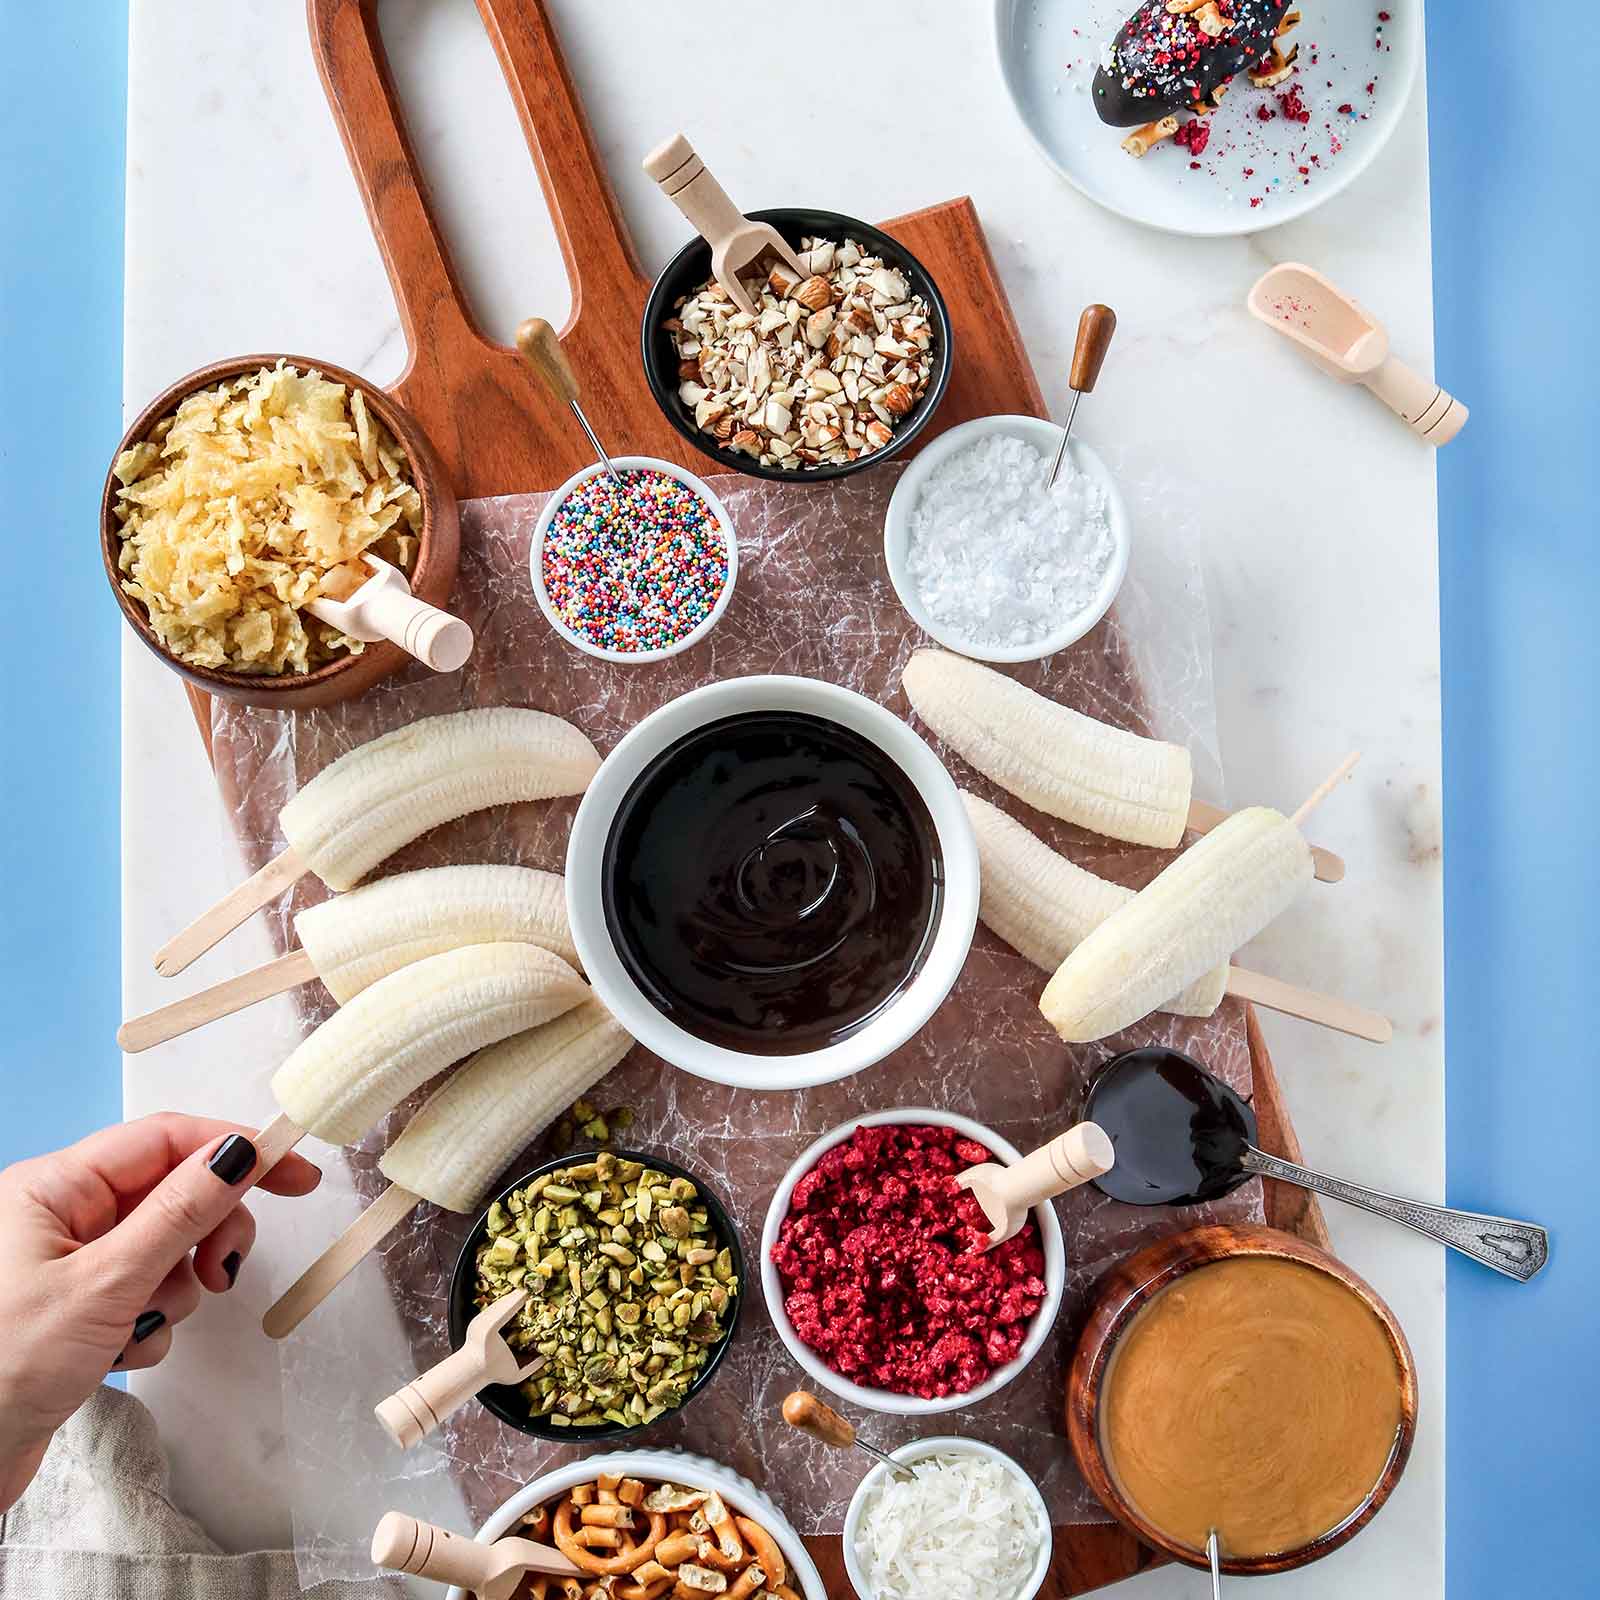 A wooden board placed on top of a piece of marble. Displayed on the board are frozen bananas and assorted gluten-free and vegan toppings to make frozen vegan banana pops including gluten-free sprinkles, gluten-free pretzels and crushed nuts.